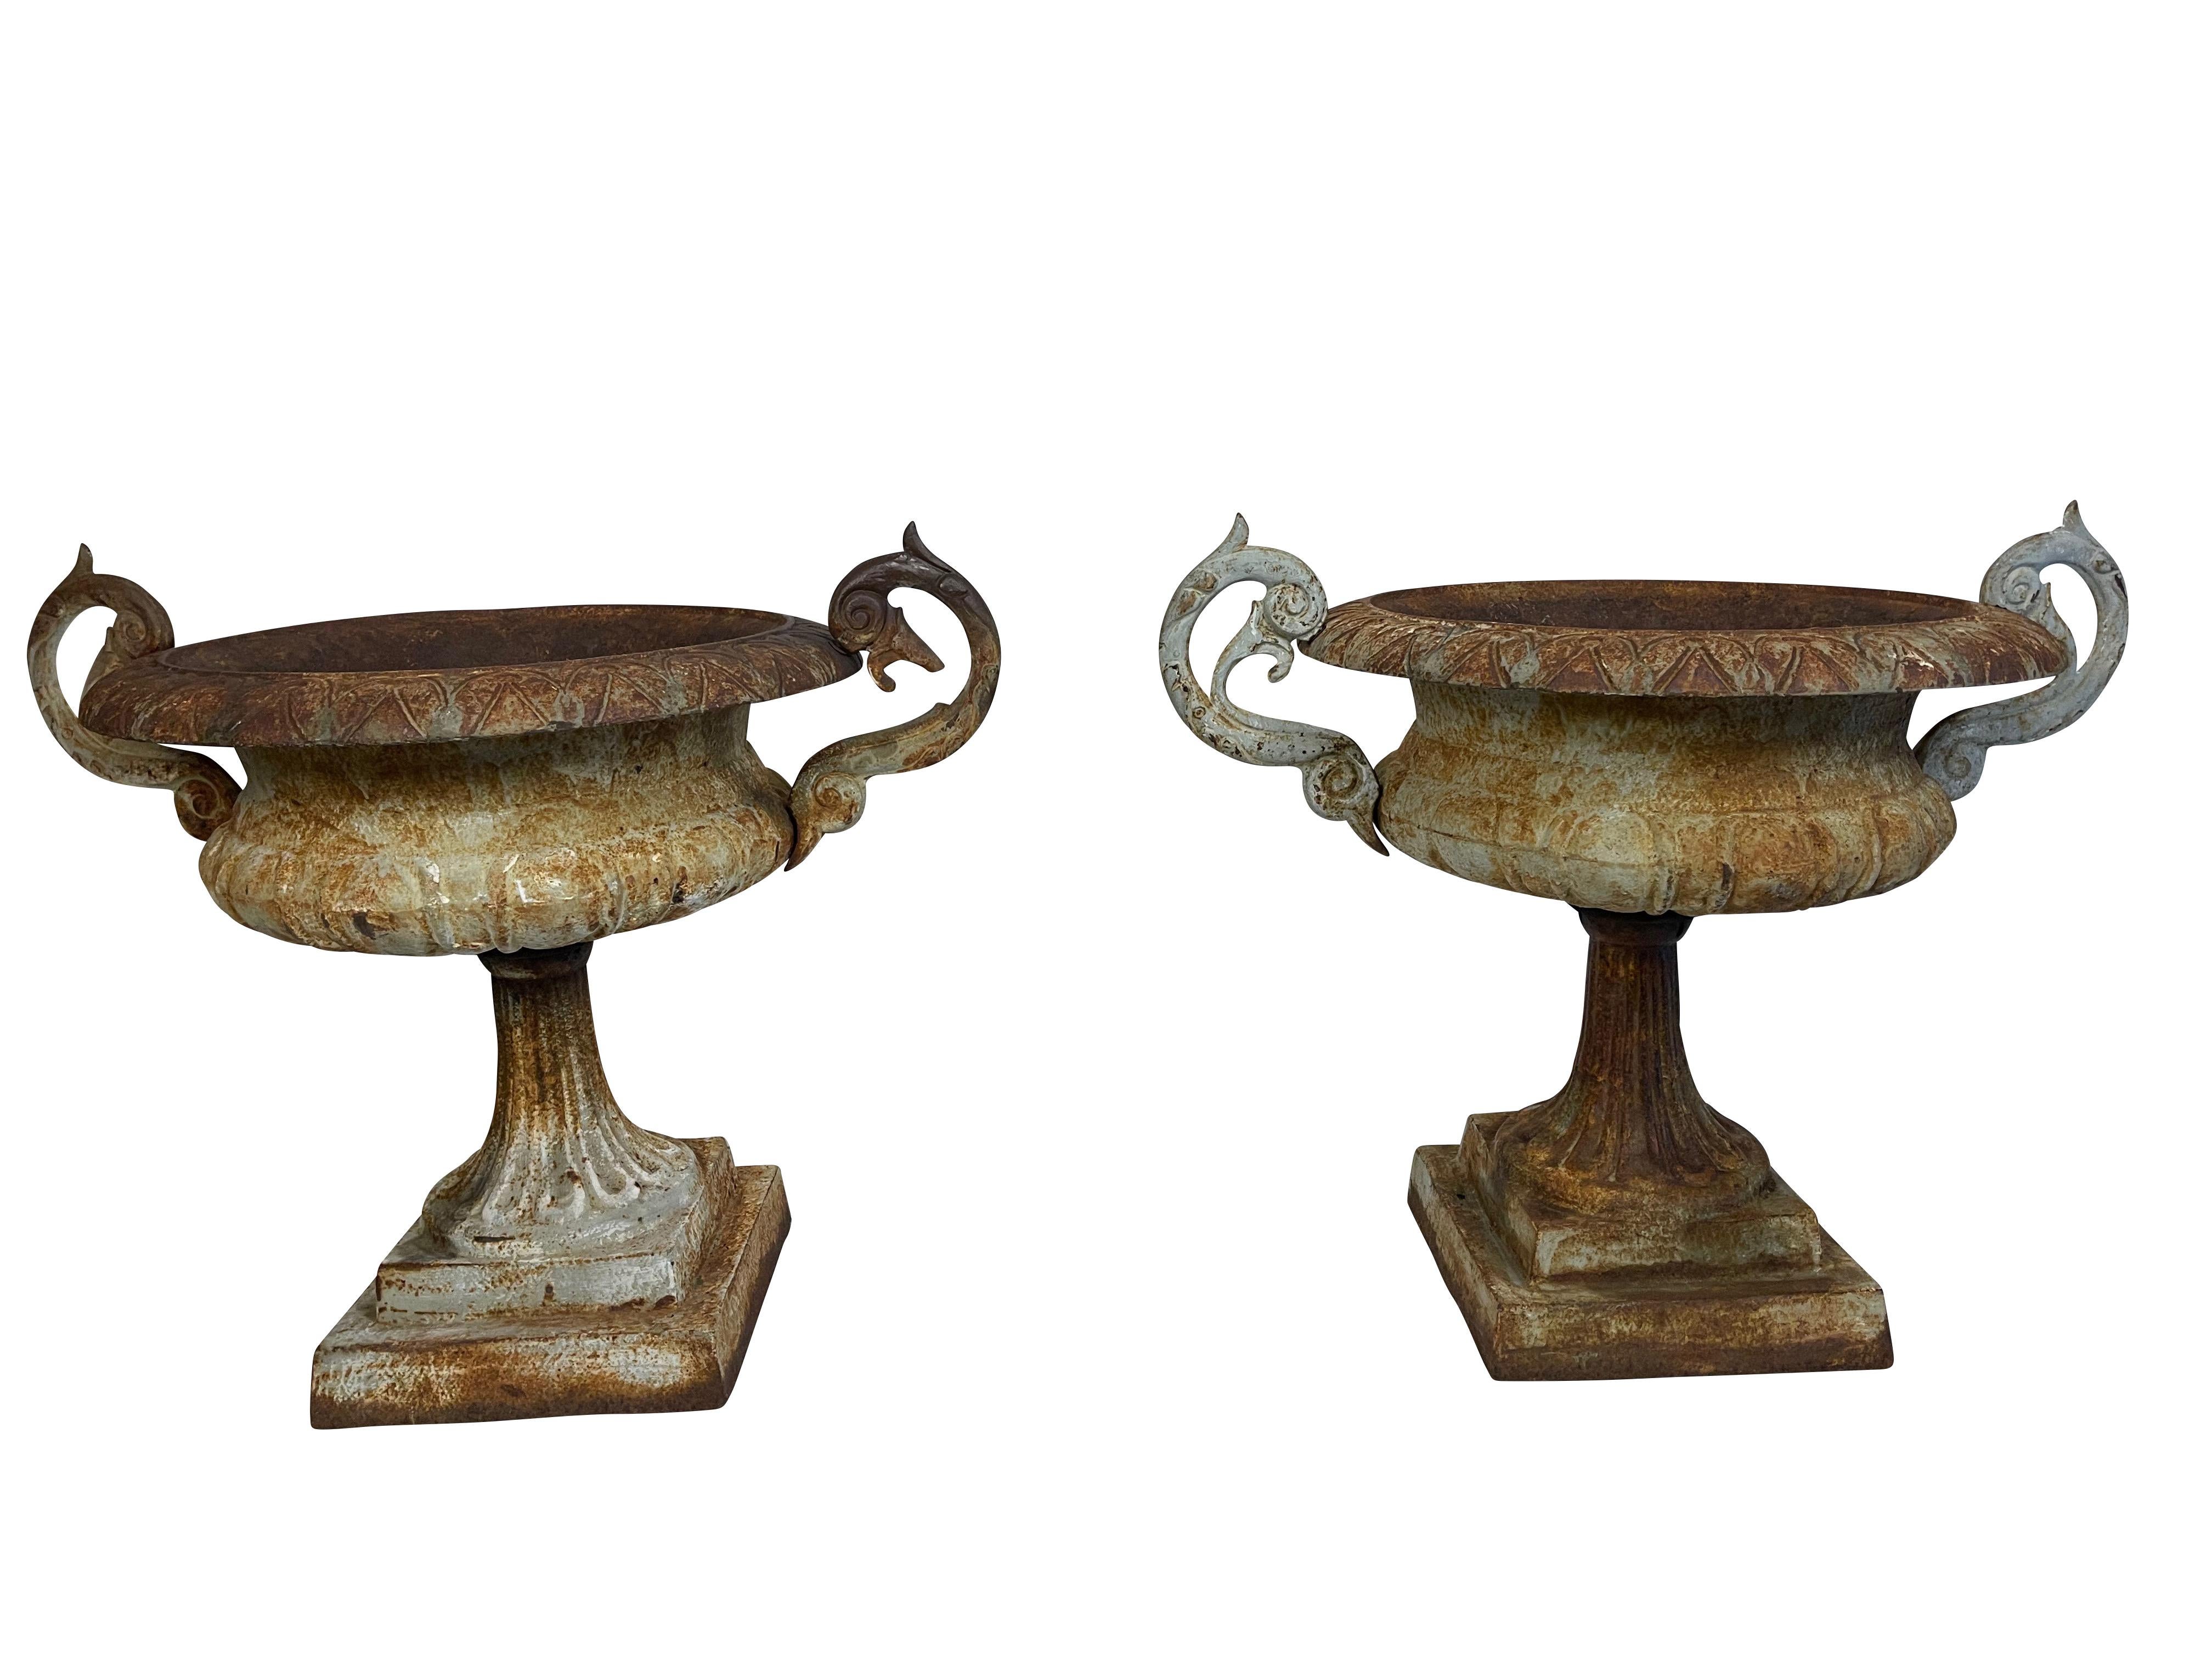 Pair of round Victorian cast iron jardinières/ planters with long reticulated pedestal, decoratively scroll form handles and egg and dart form decoration along the flared rim with a hole in the bottom for drainage. The basin sits on a square base.